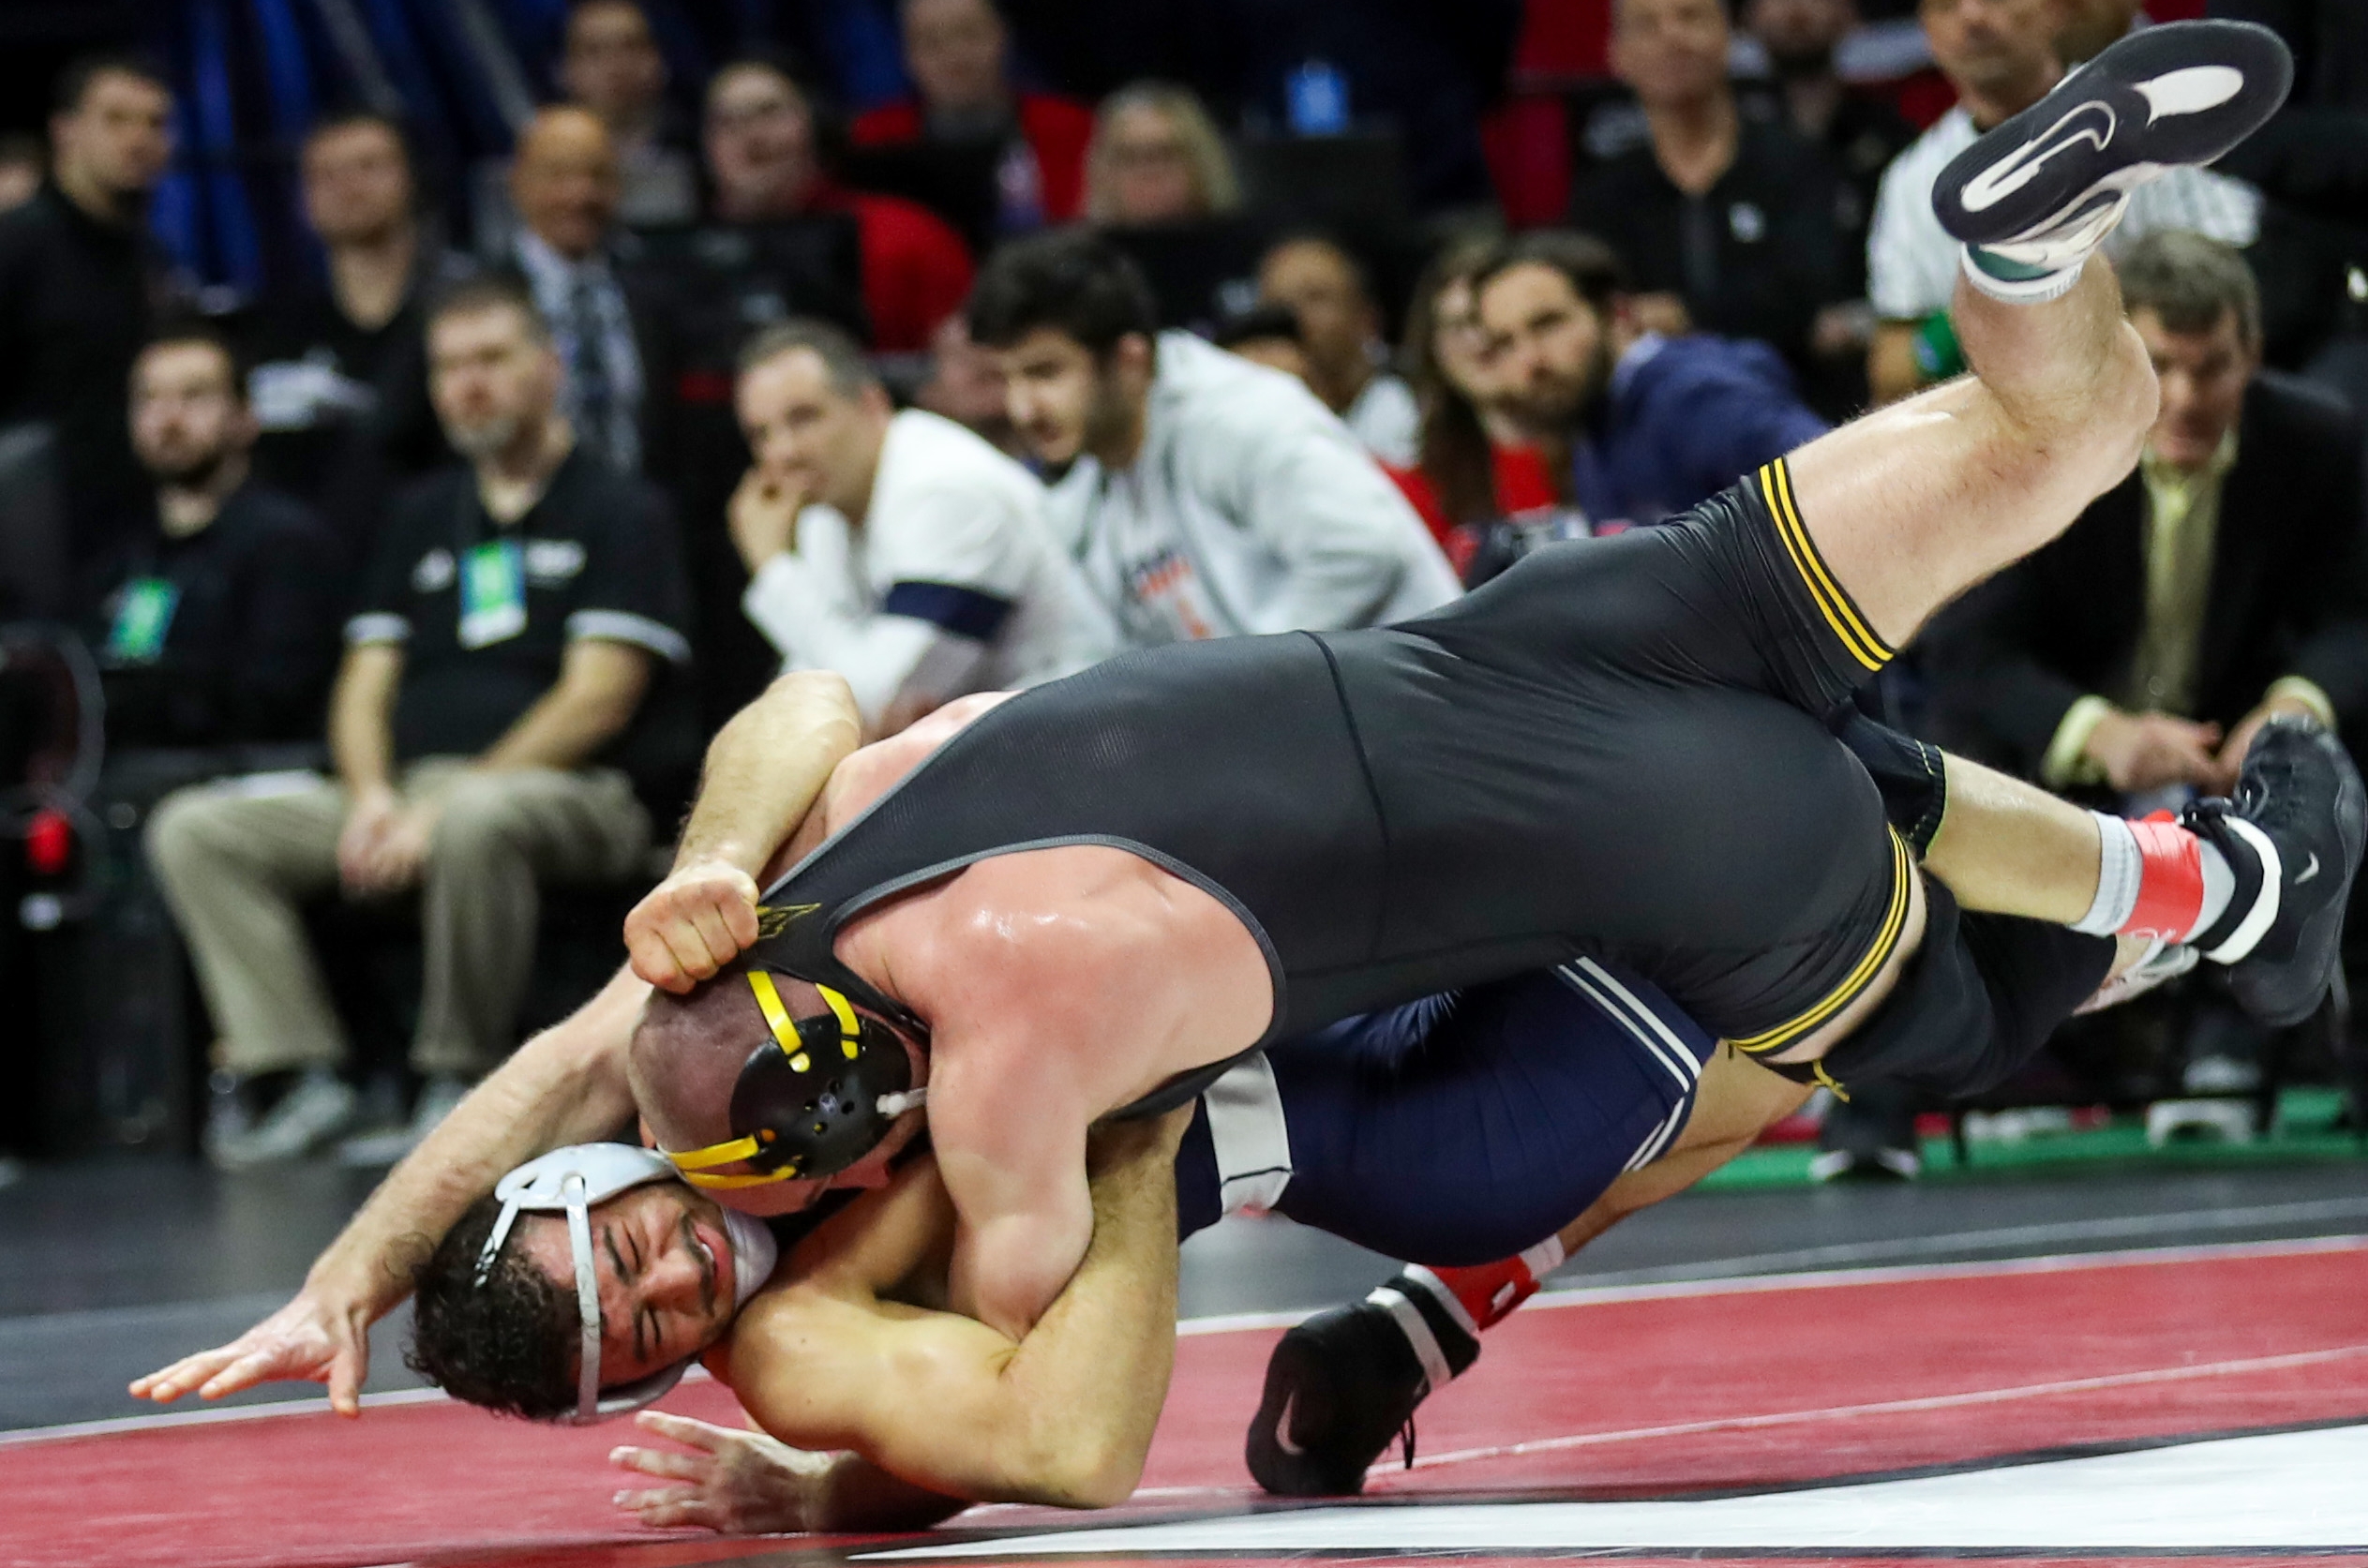 NCAA Wrestling Championships free live stream (3/18/21) How to watch, time, channel